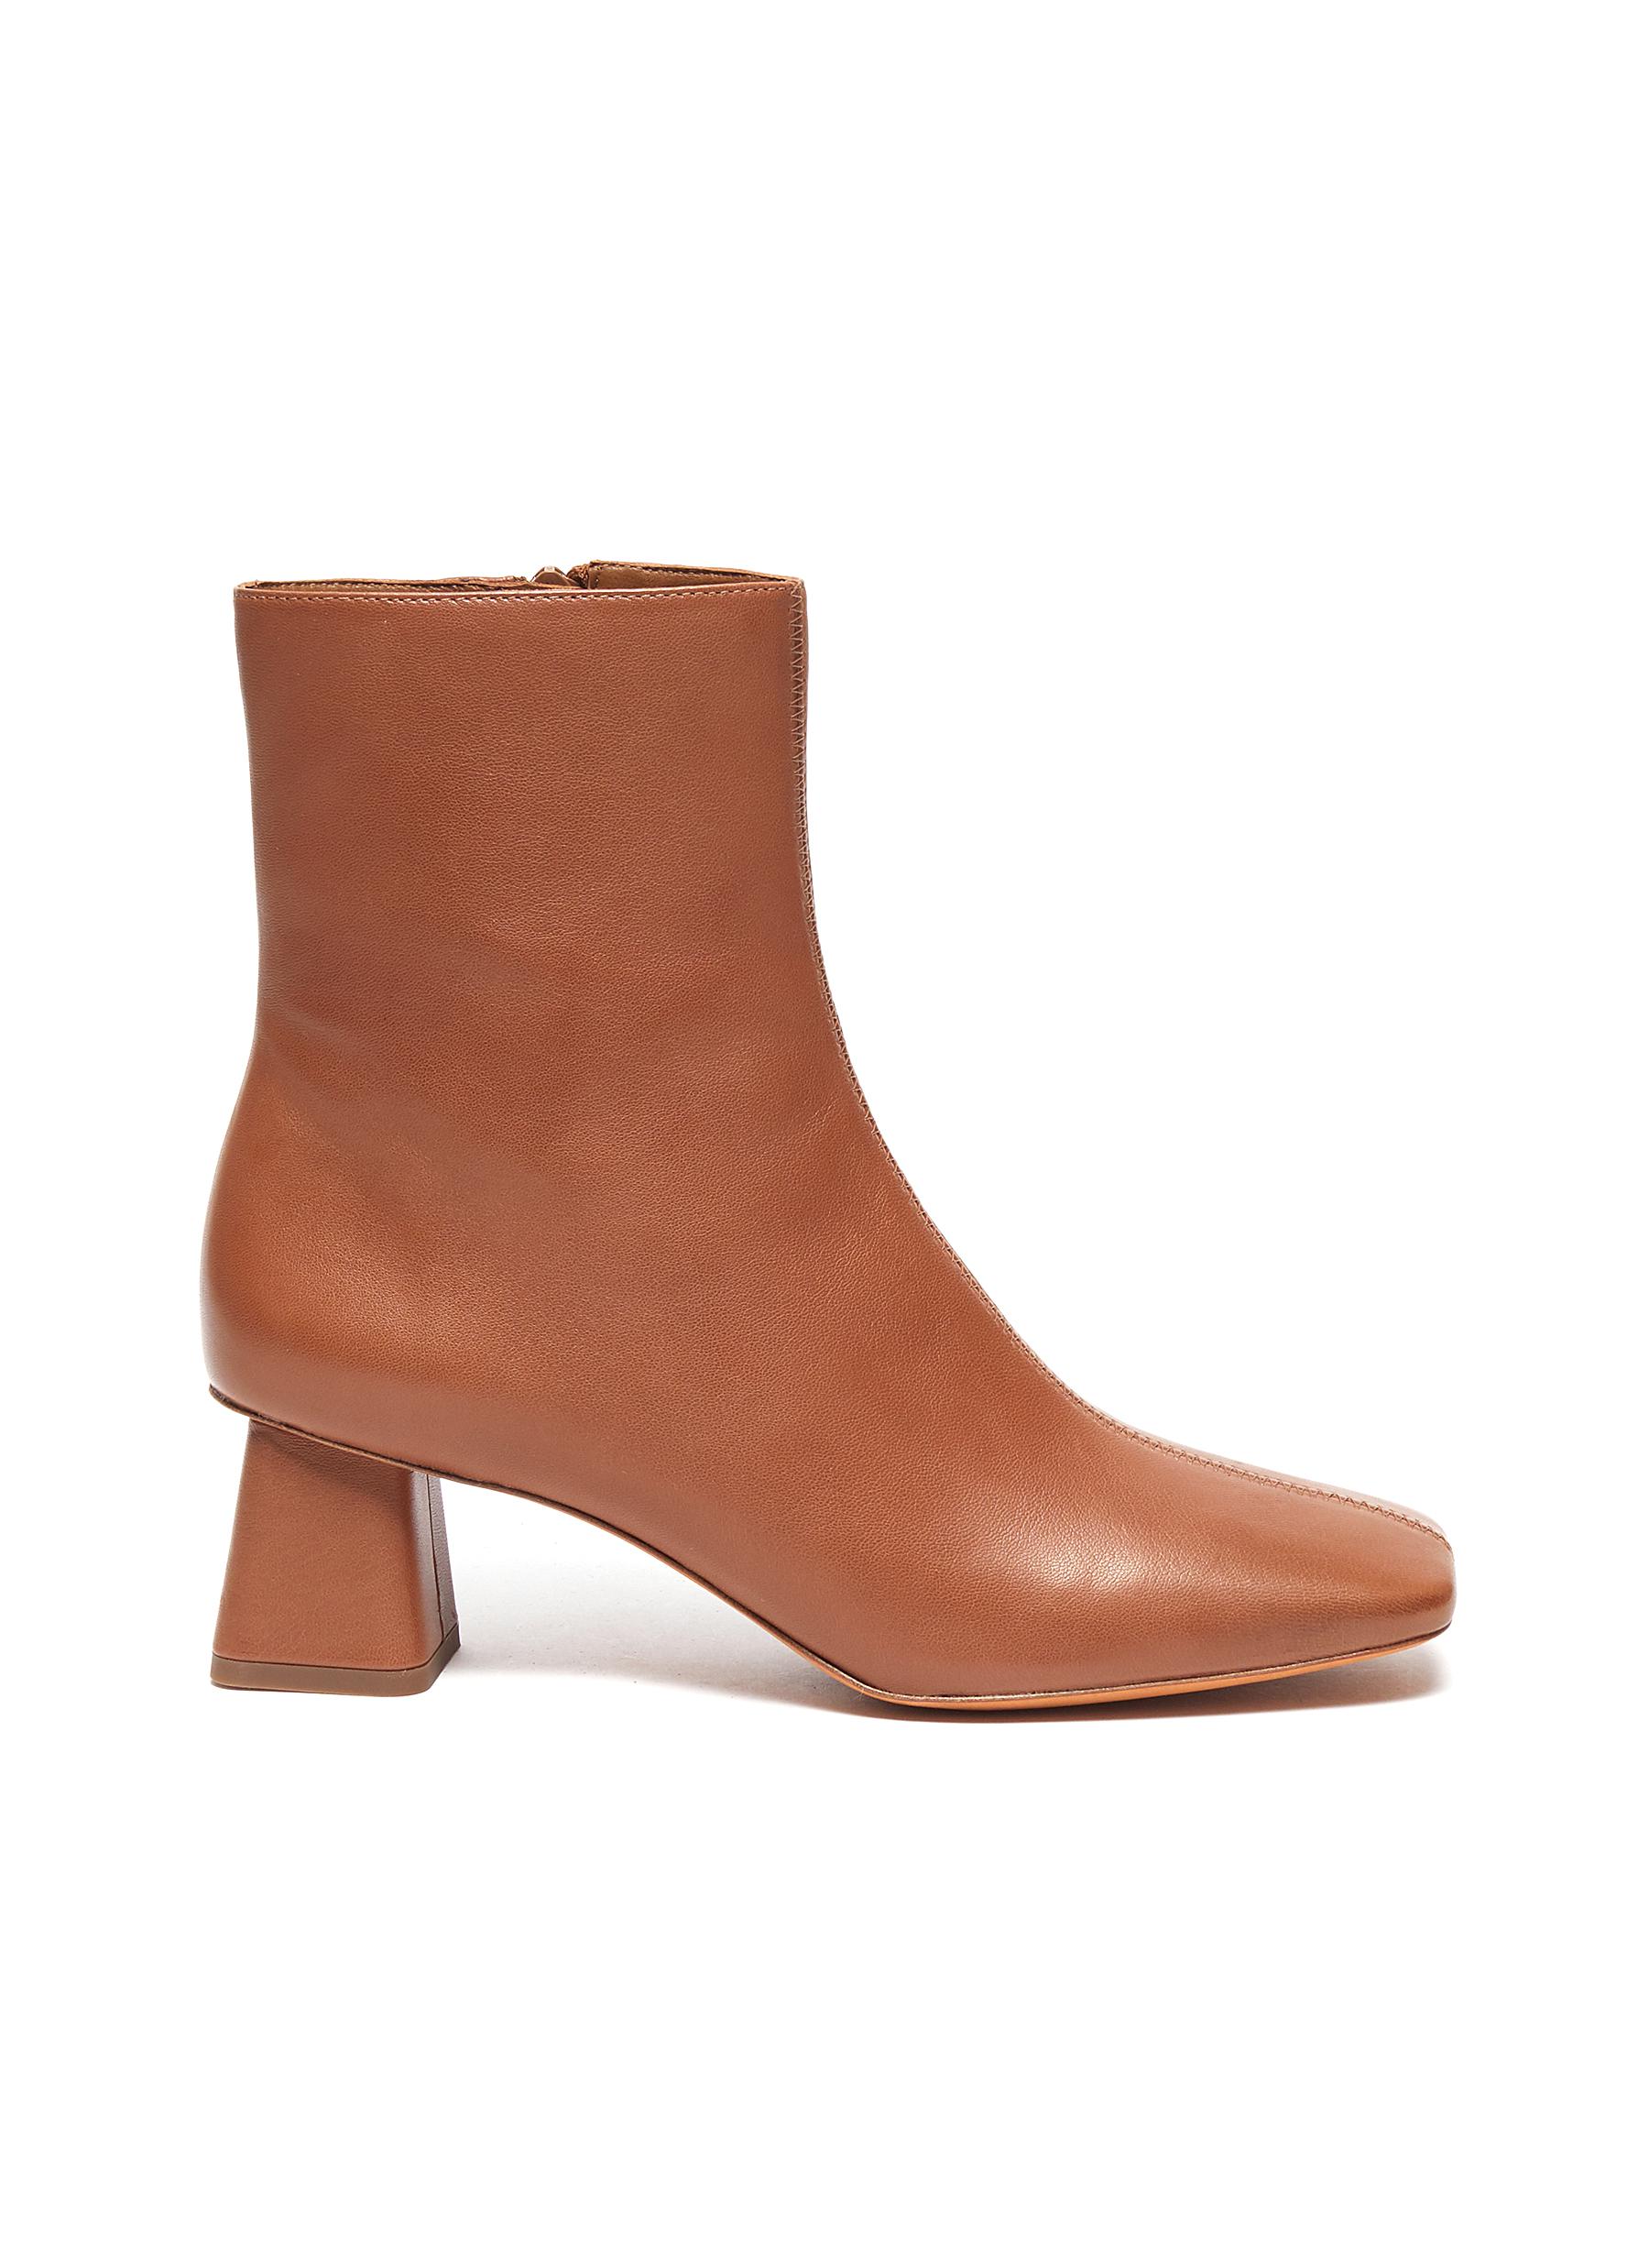 VINCE | 'Koren' leather ankle boots 